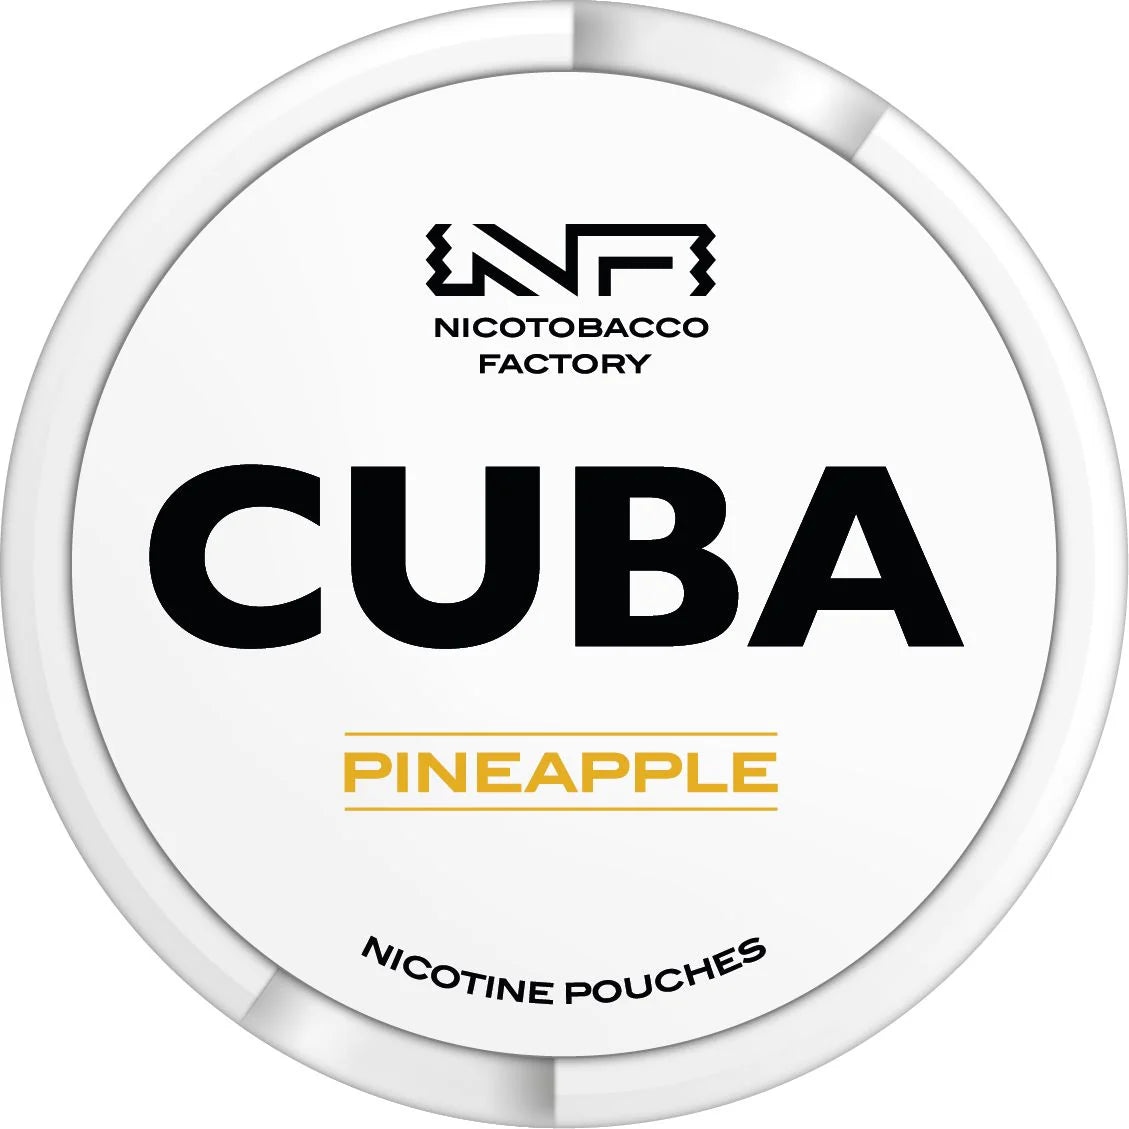 Pineapple Nicotine Pouches By Cuba White